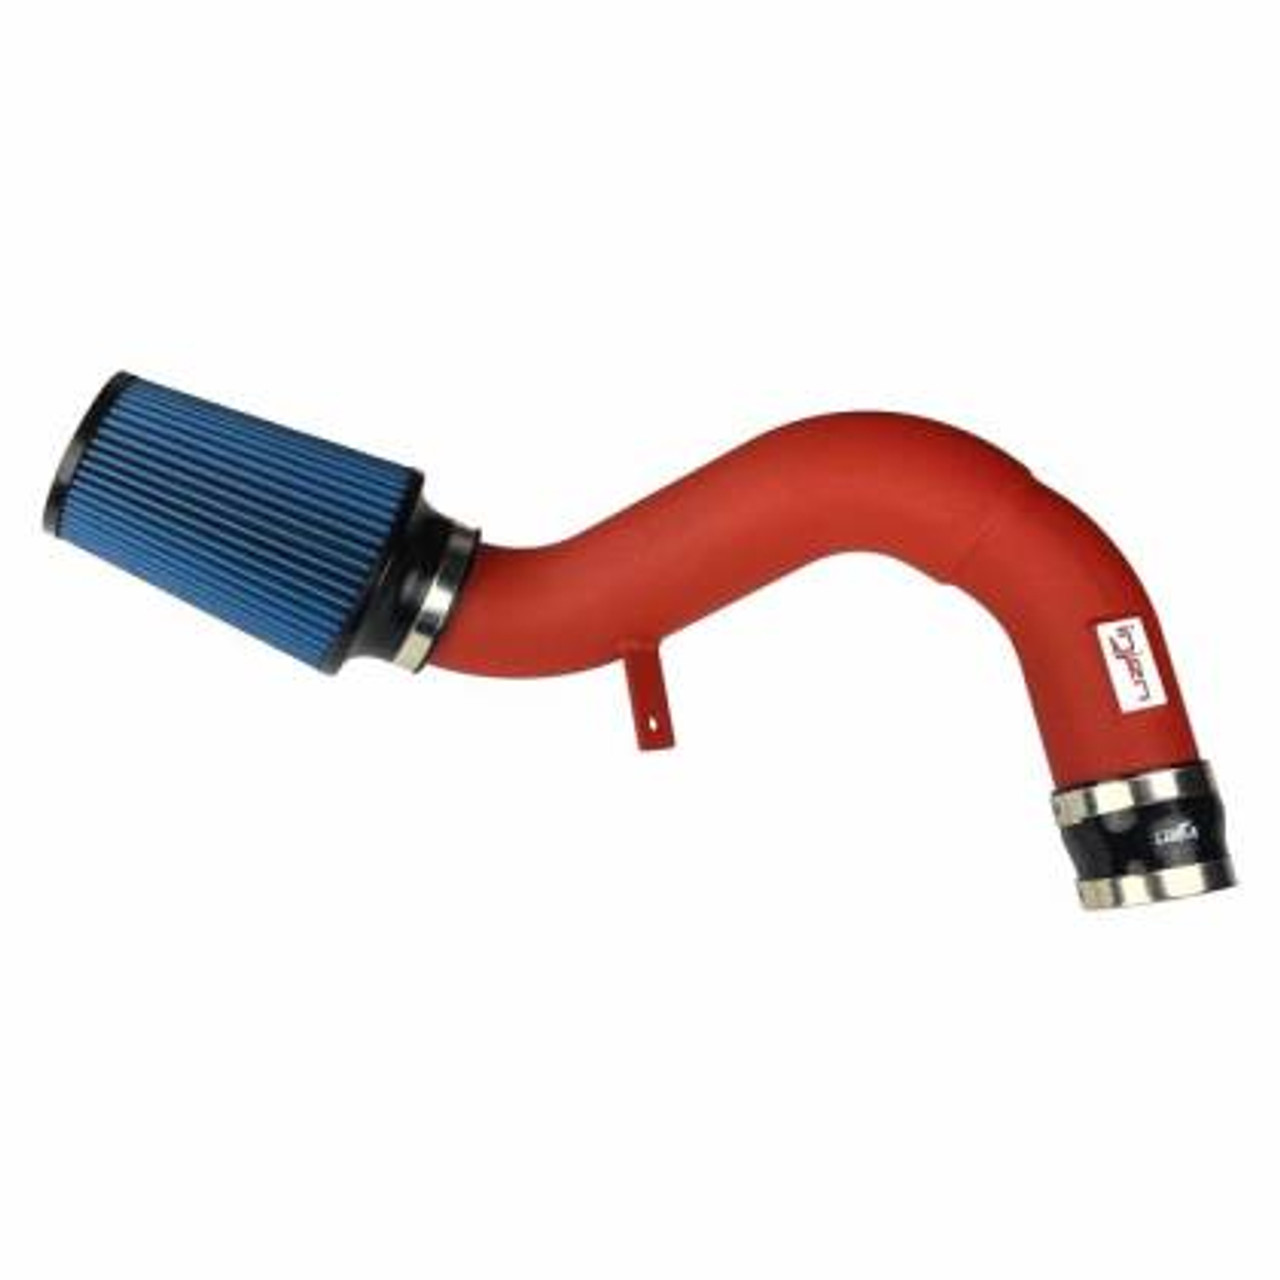 Injen SP Cold Air Intake System for B9 S4 & S5